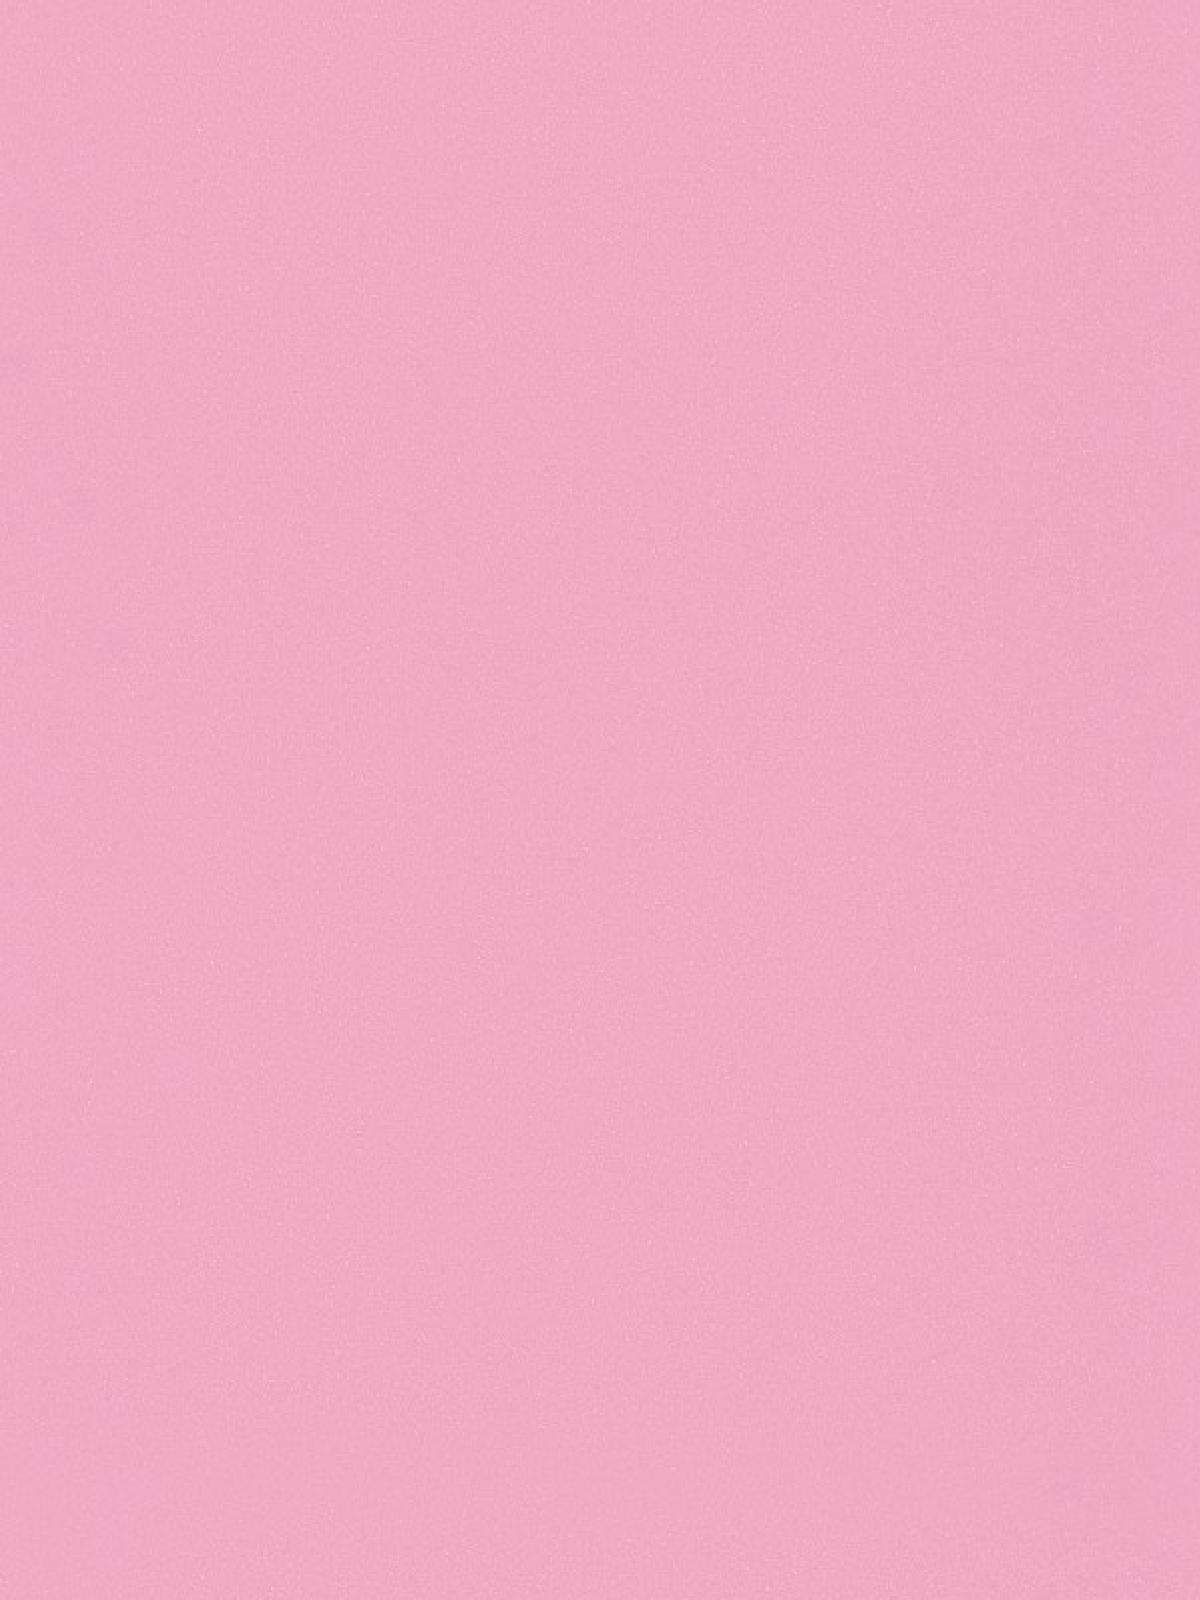 Baby Pink Wallpapers - Wallpaper Cave